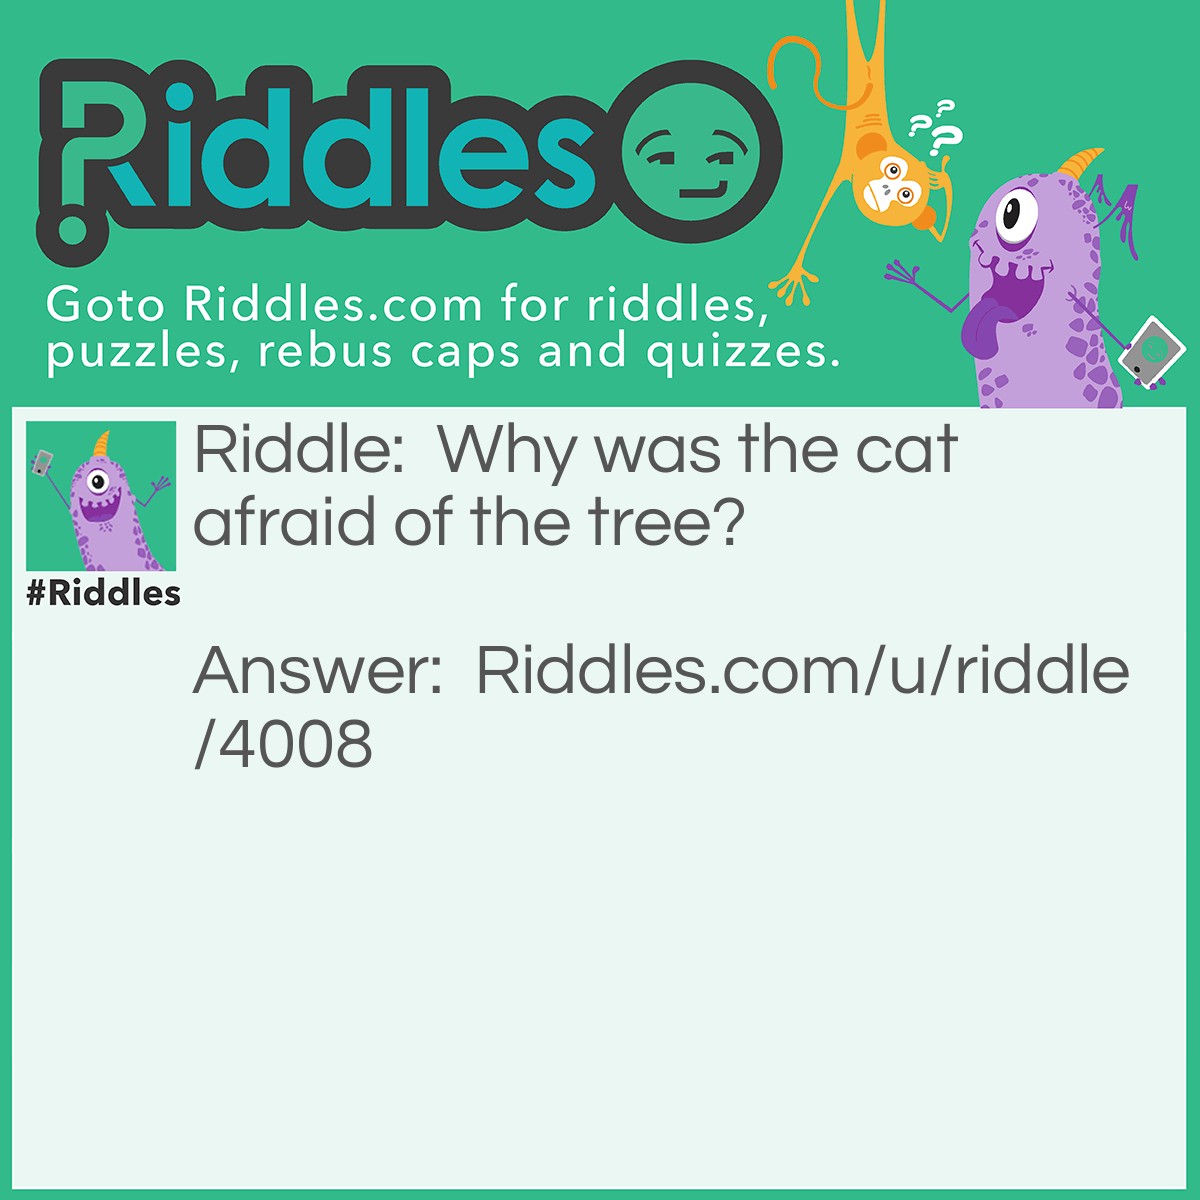 Riddle: Why was the cat afraid of the tree? Answer: Because of it's bark.